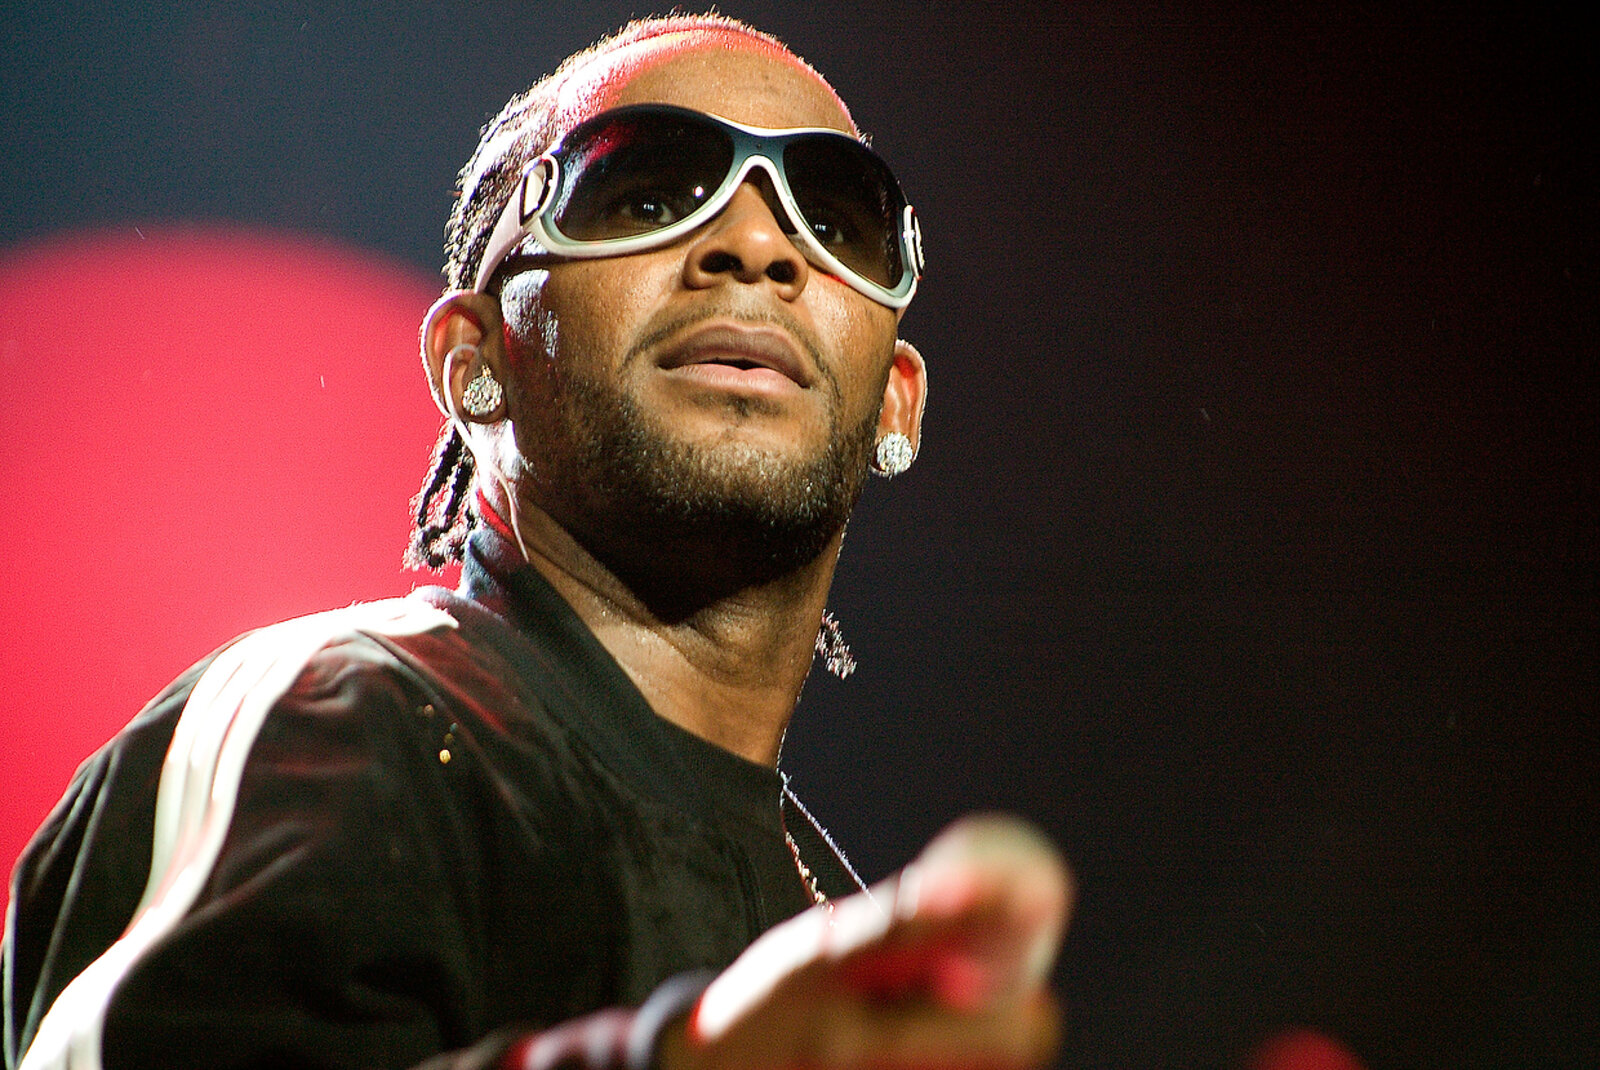 R. Kelly is trying to get anonymous judges for his upcoming trial, but he's doing it only to benefit himself. This news isn't a surprise though.